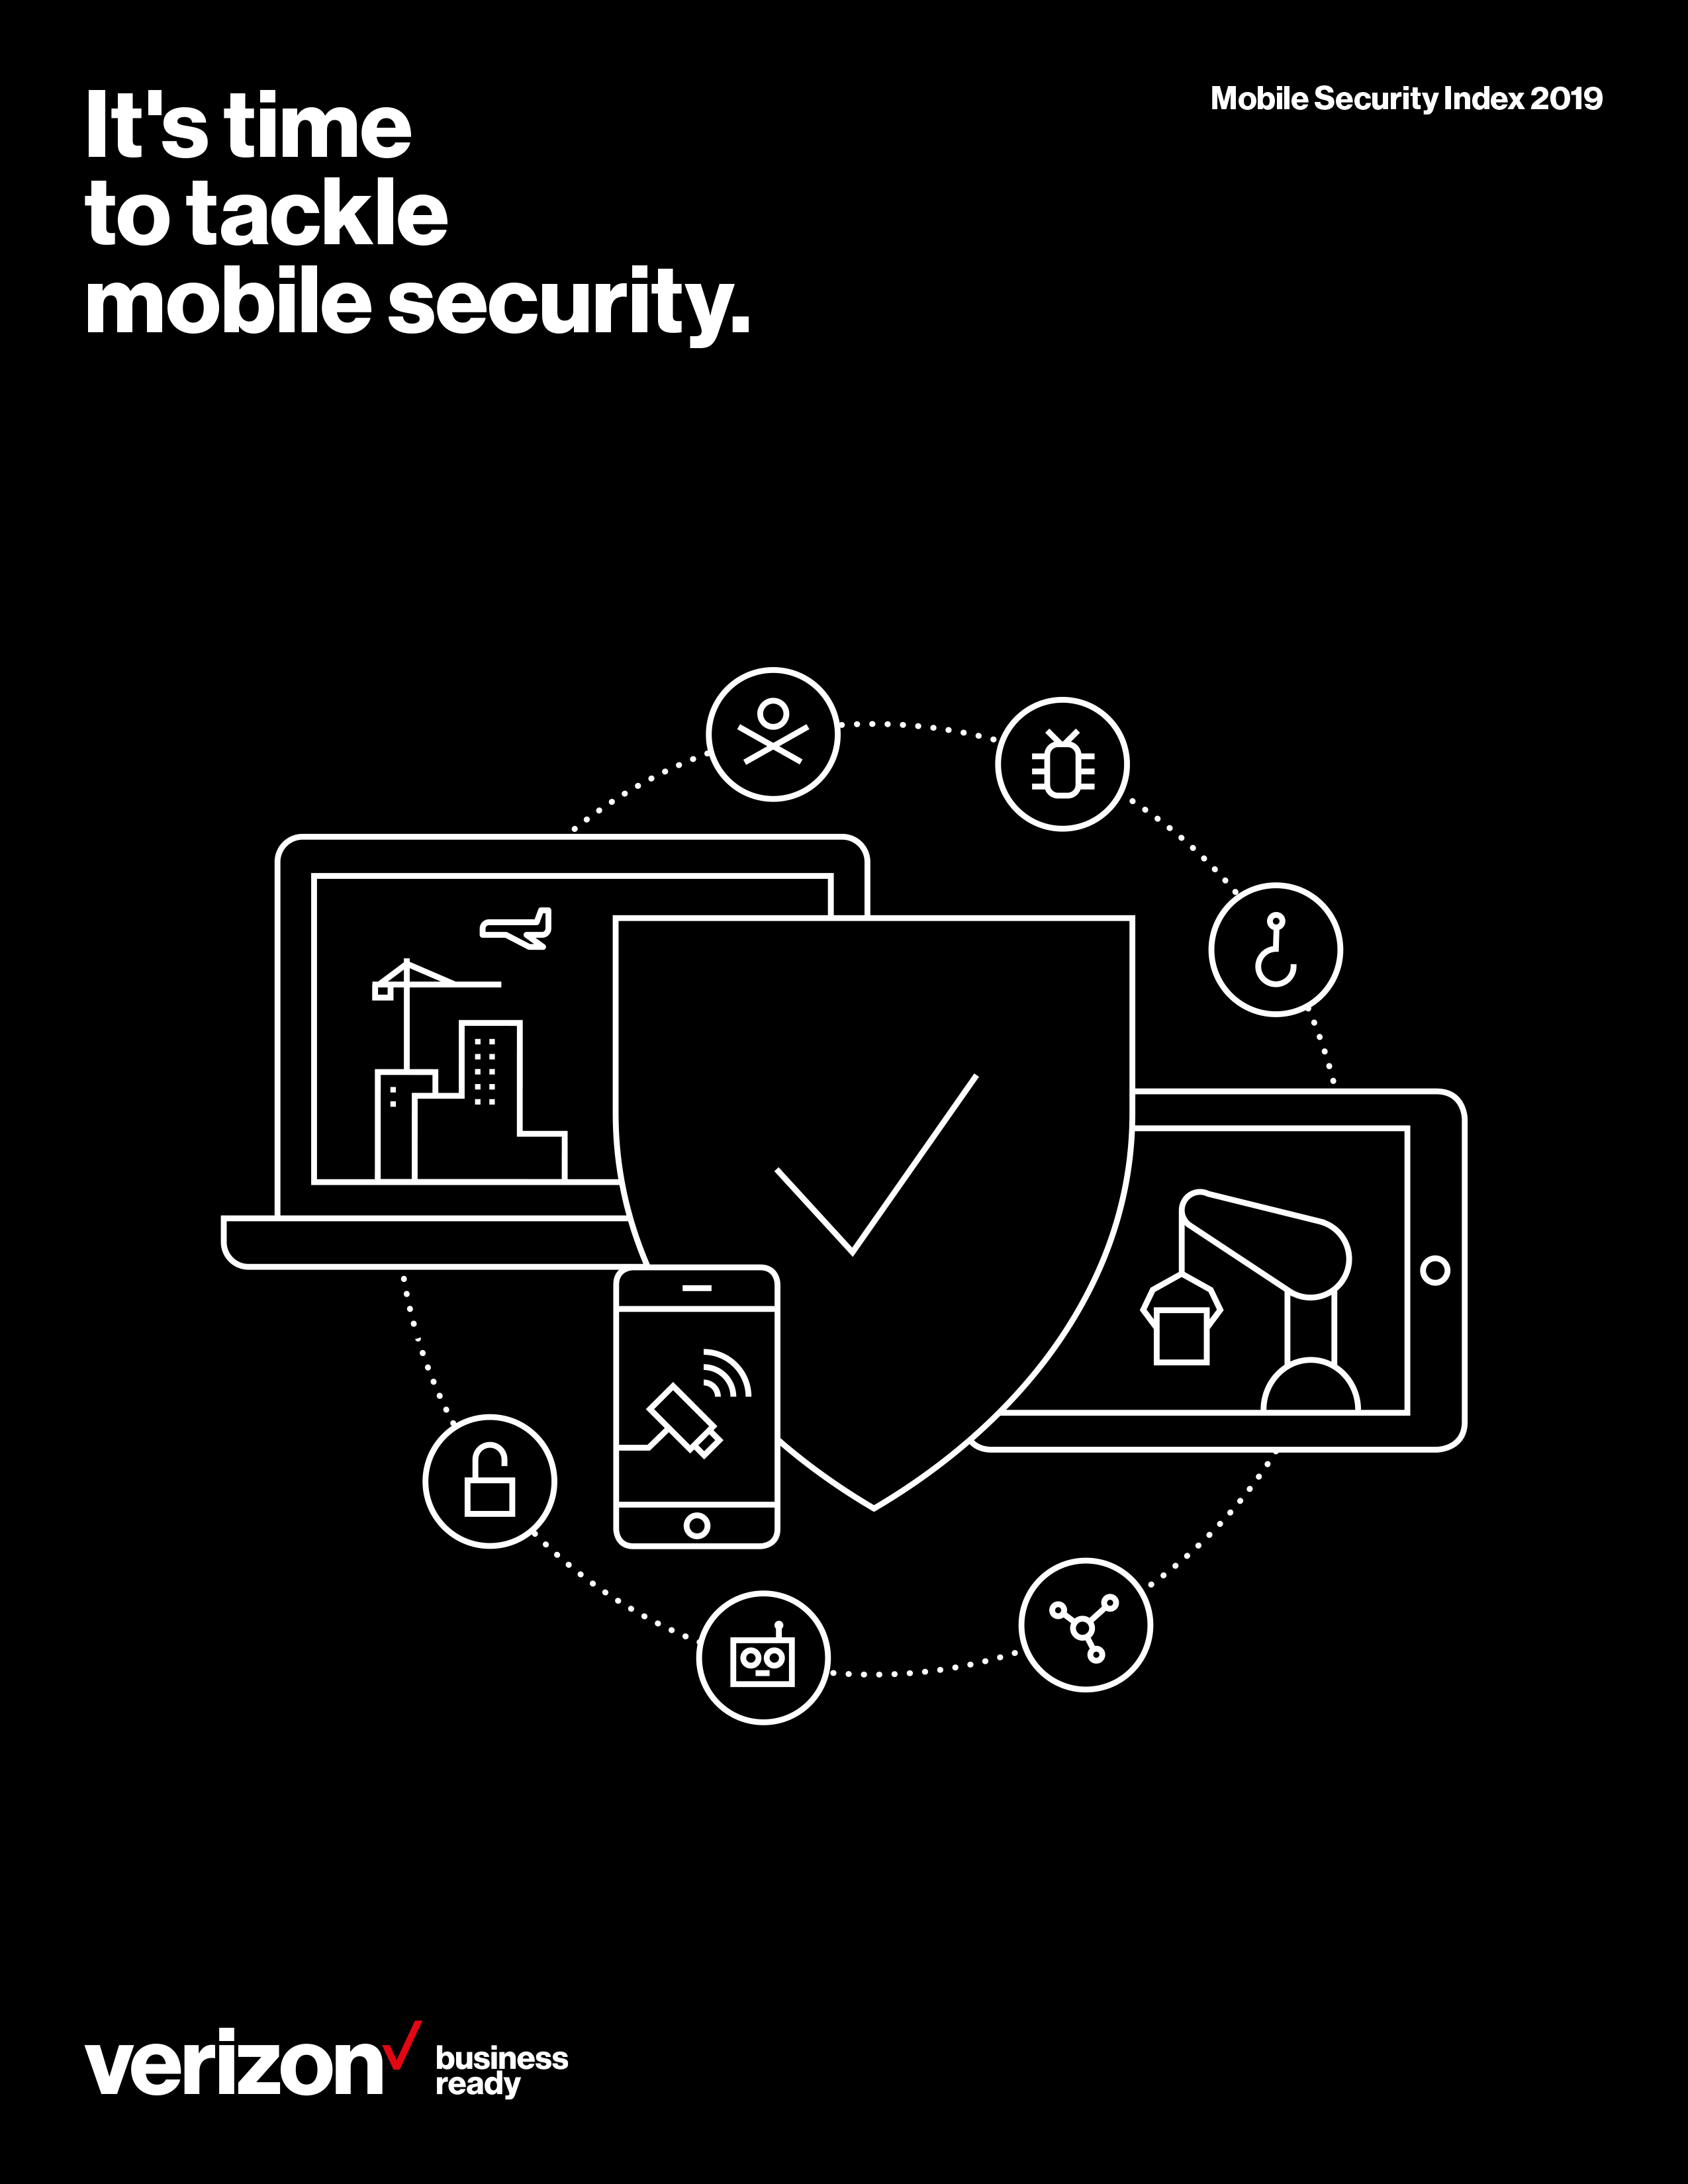 Mobile Security Index 2019